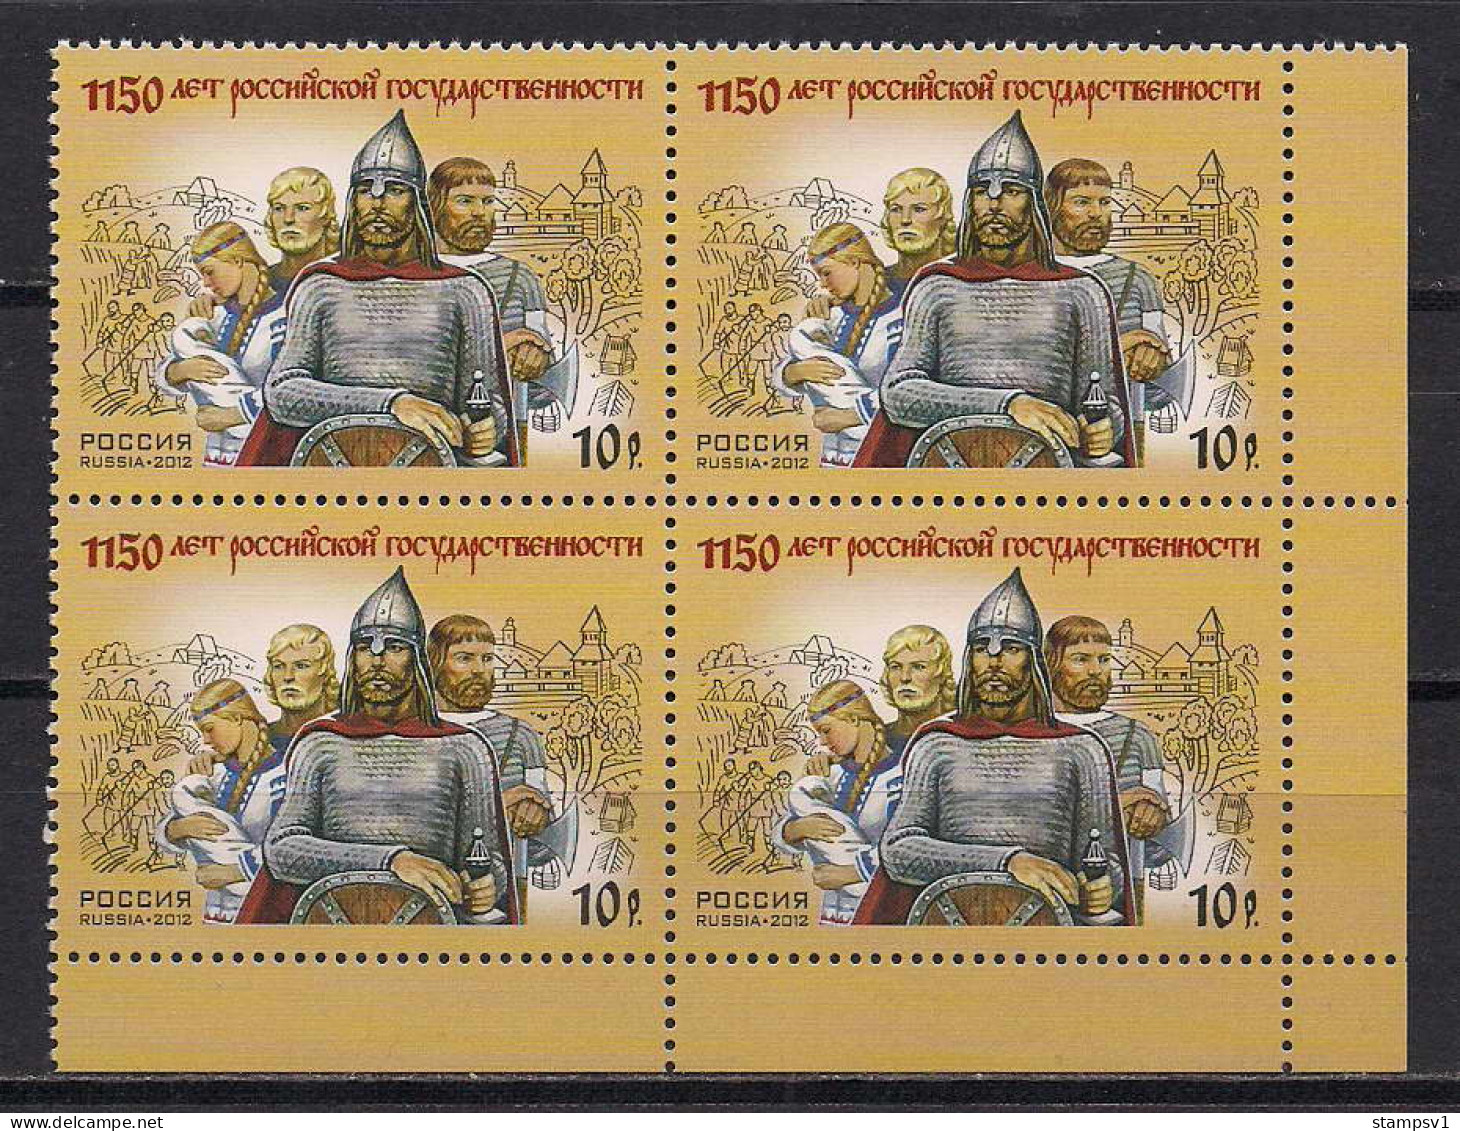 Russia 2012 The 1150th Anniversary Of Russian Statehood. Mi 1867 Block Of Four - Unused Stamps